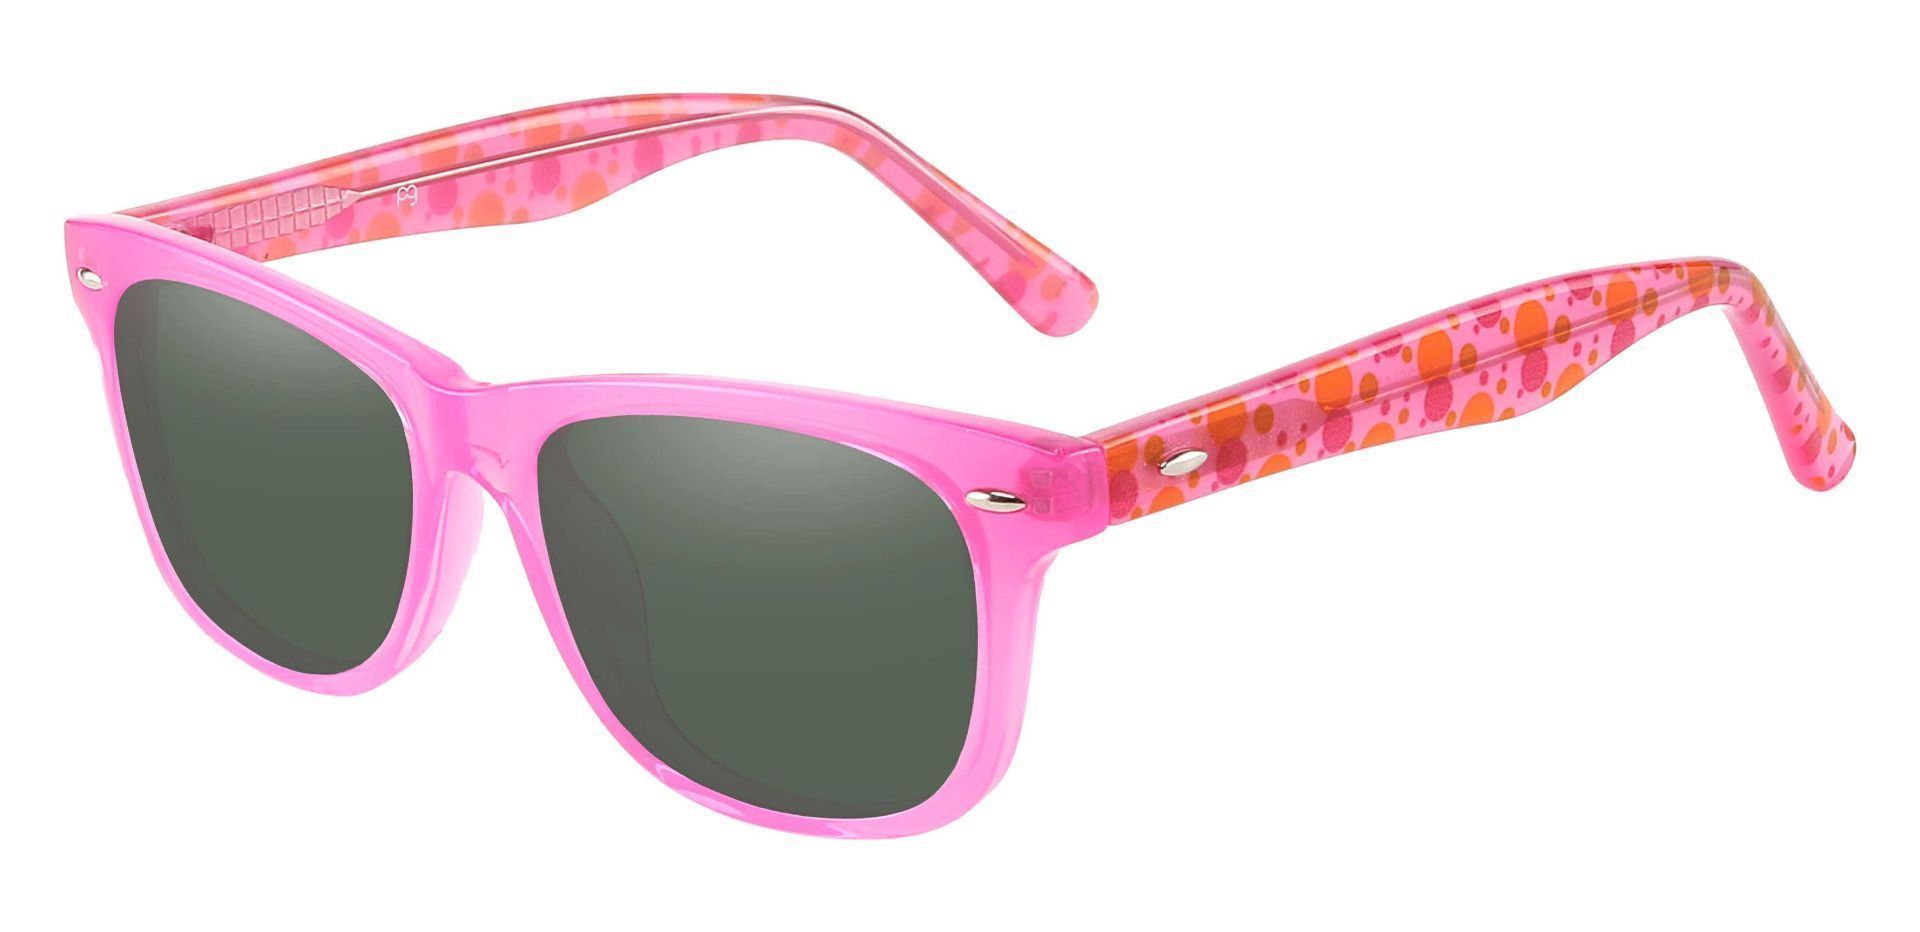 Eureka Square Lined Bifocal Sunglasses - Pink Frame With Green Lenses